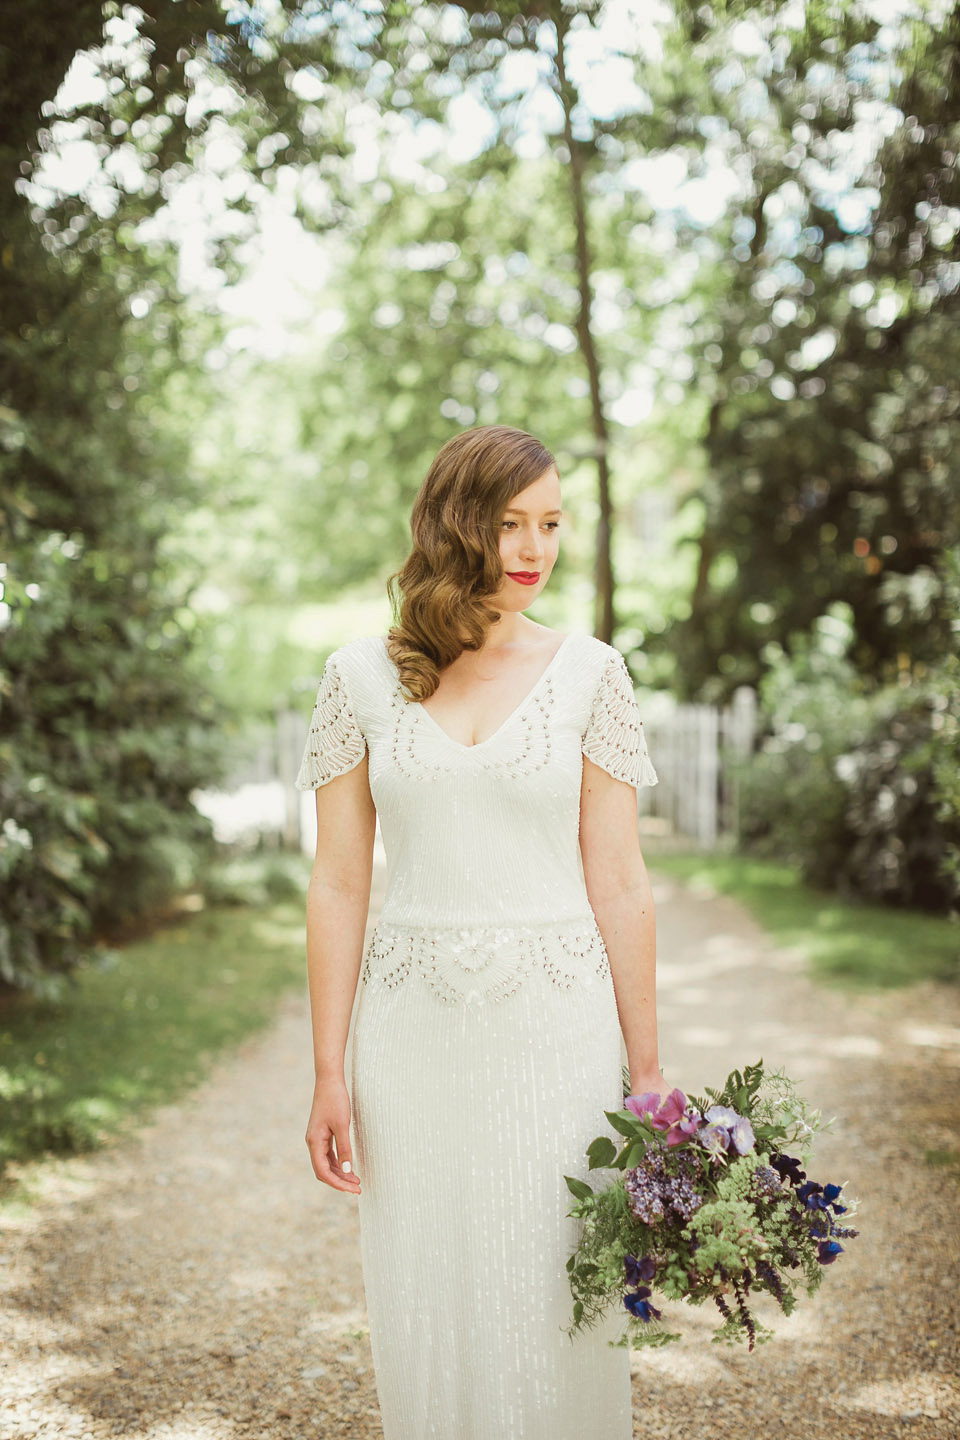 Bride Alison wears a beaded Eliza Jane Howell wedding dress for her glamorous and whimsical summer wedding. Captured by Tom Ravenshear Phtography.